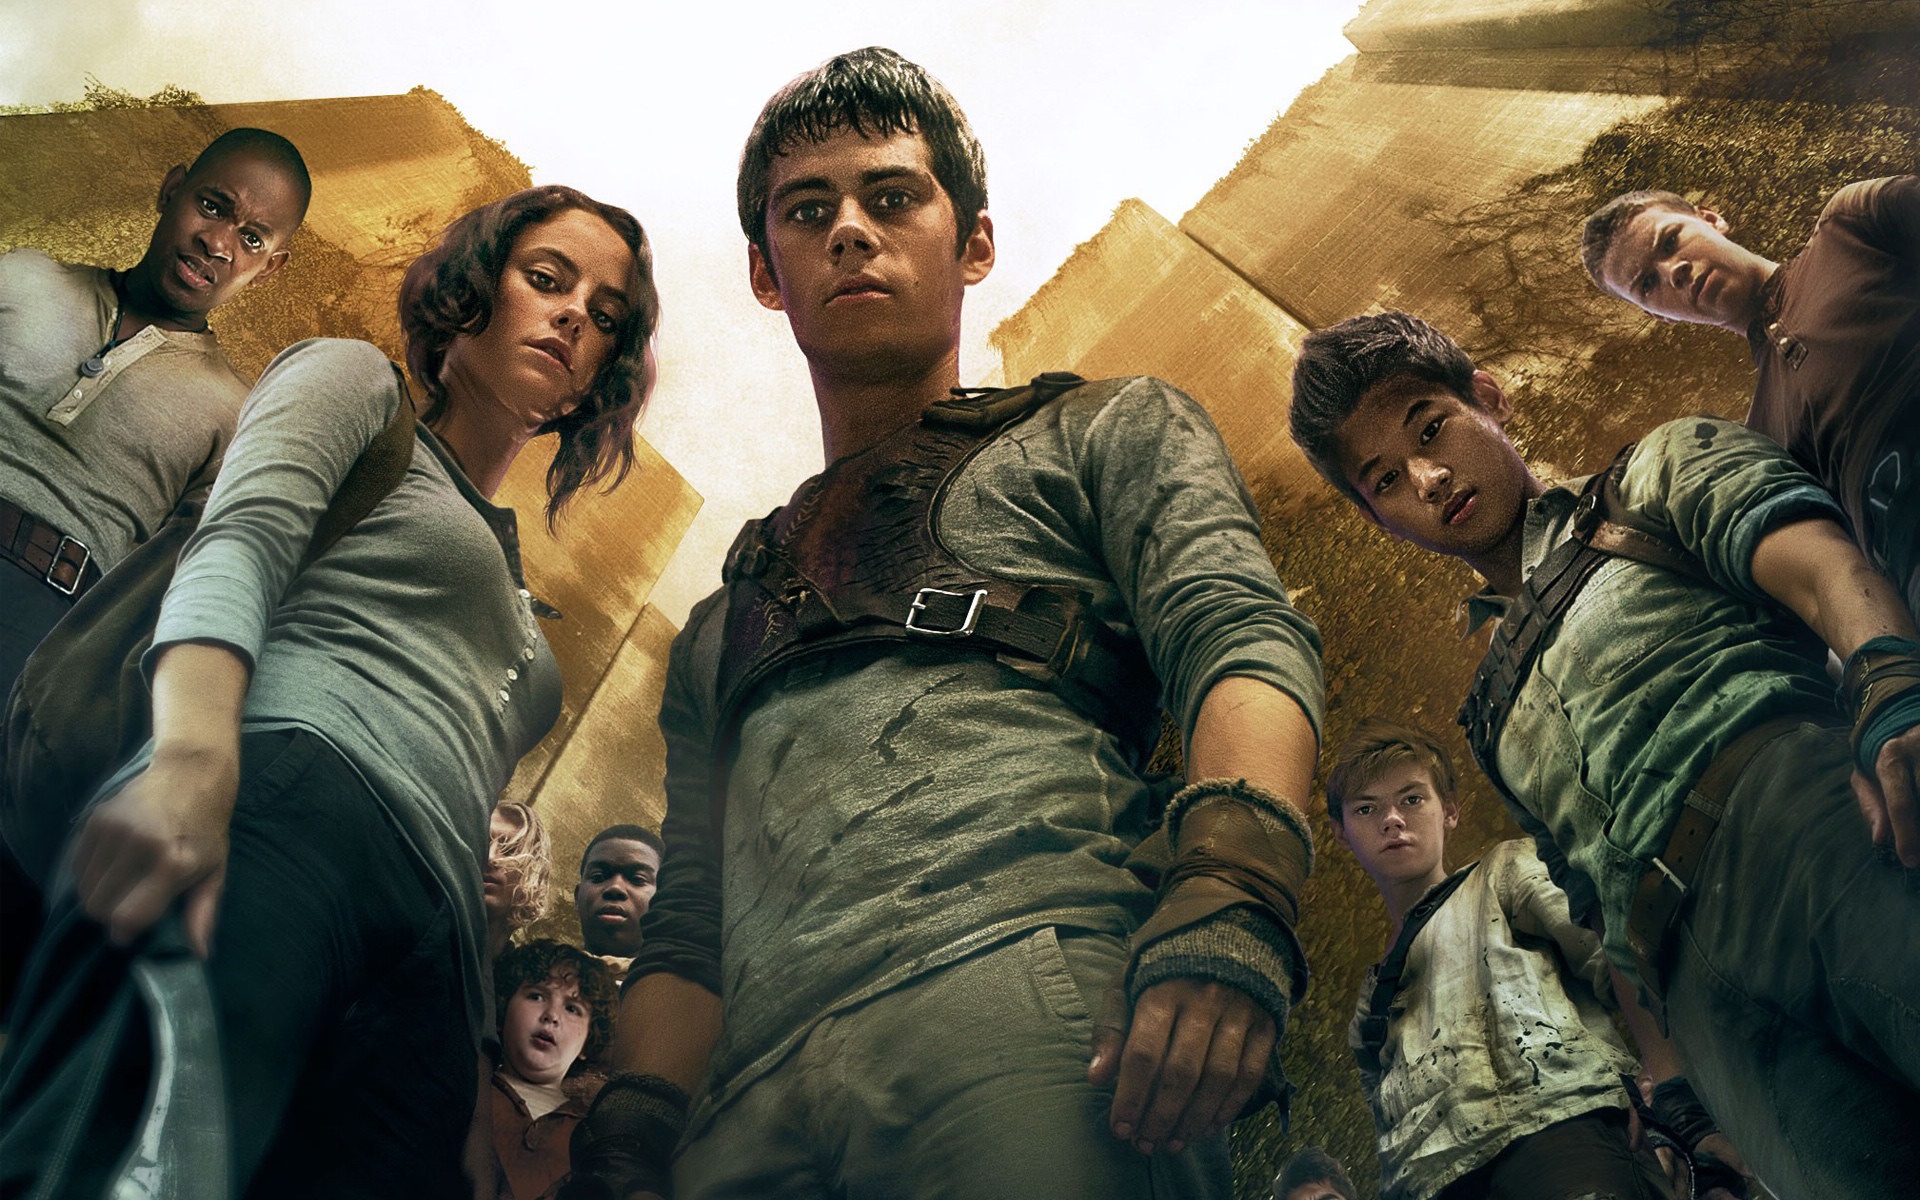 The Maze Runner HD movie wallpapers #3 - 1920x1200